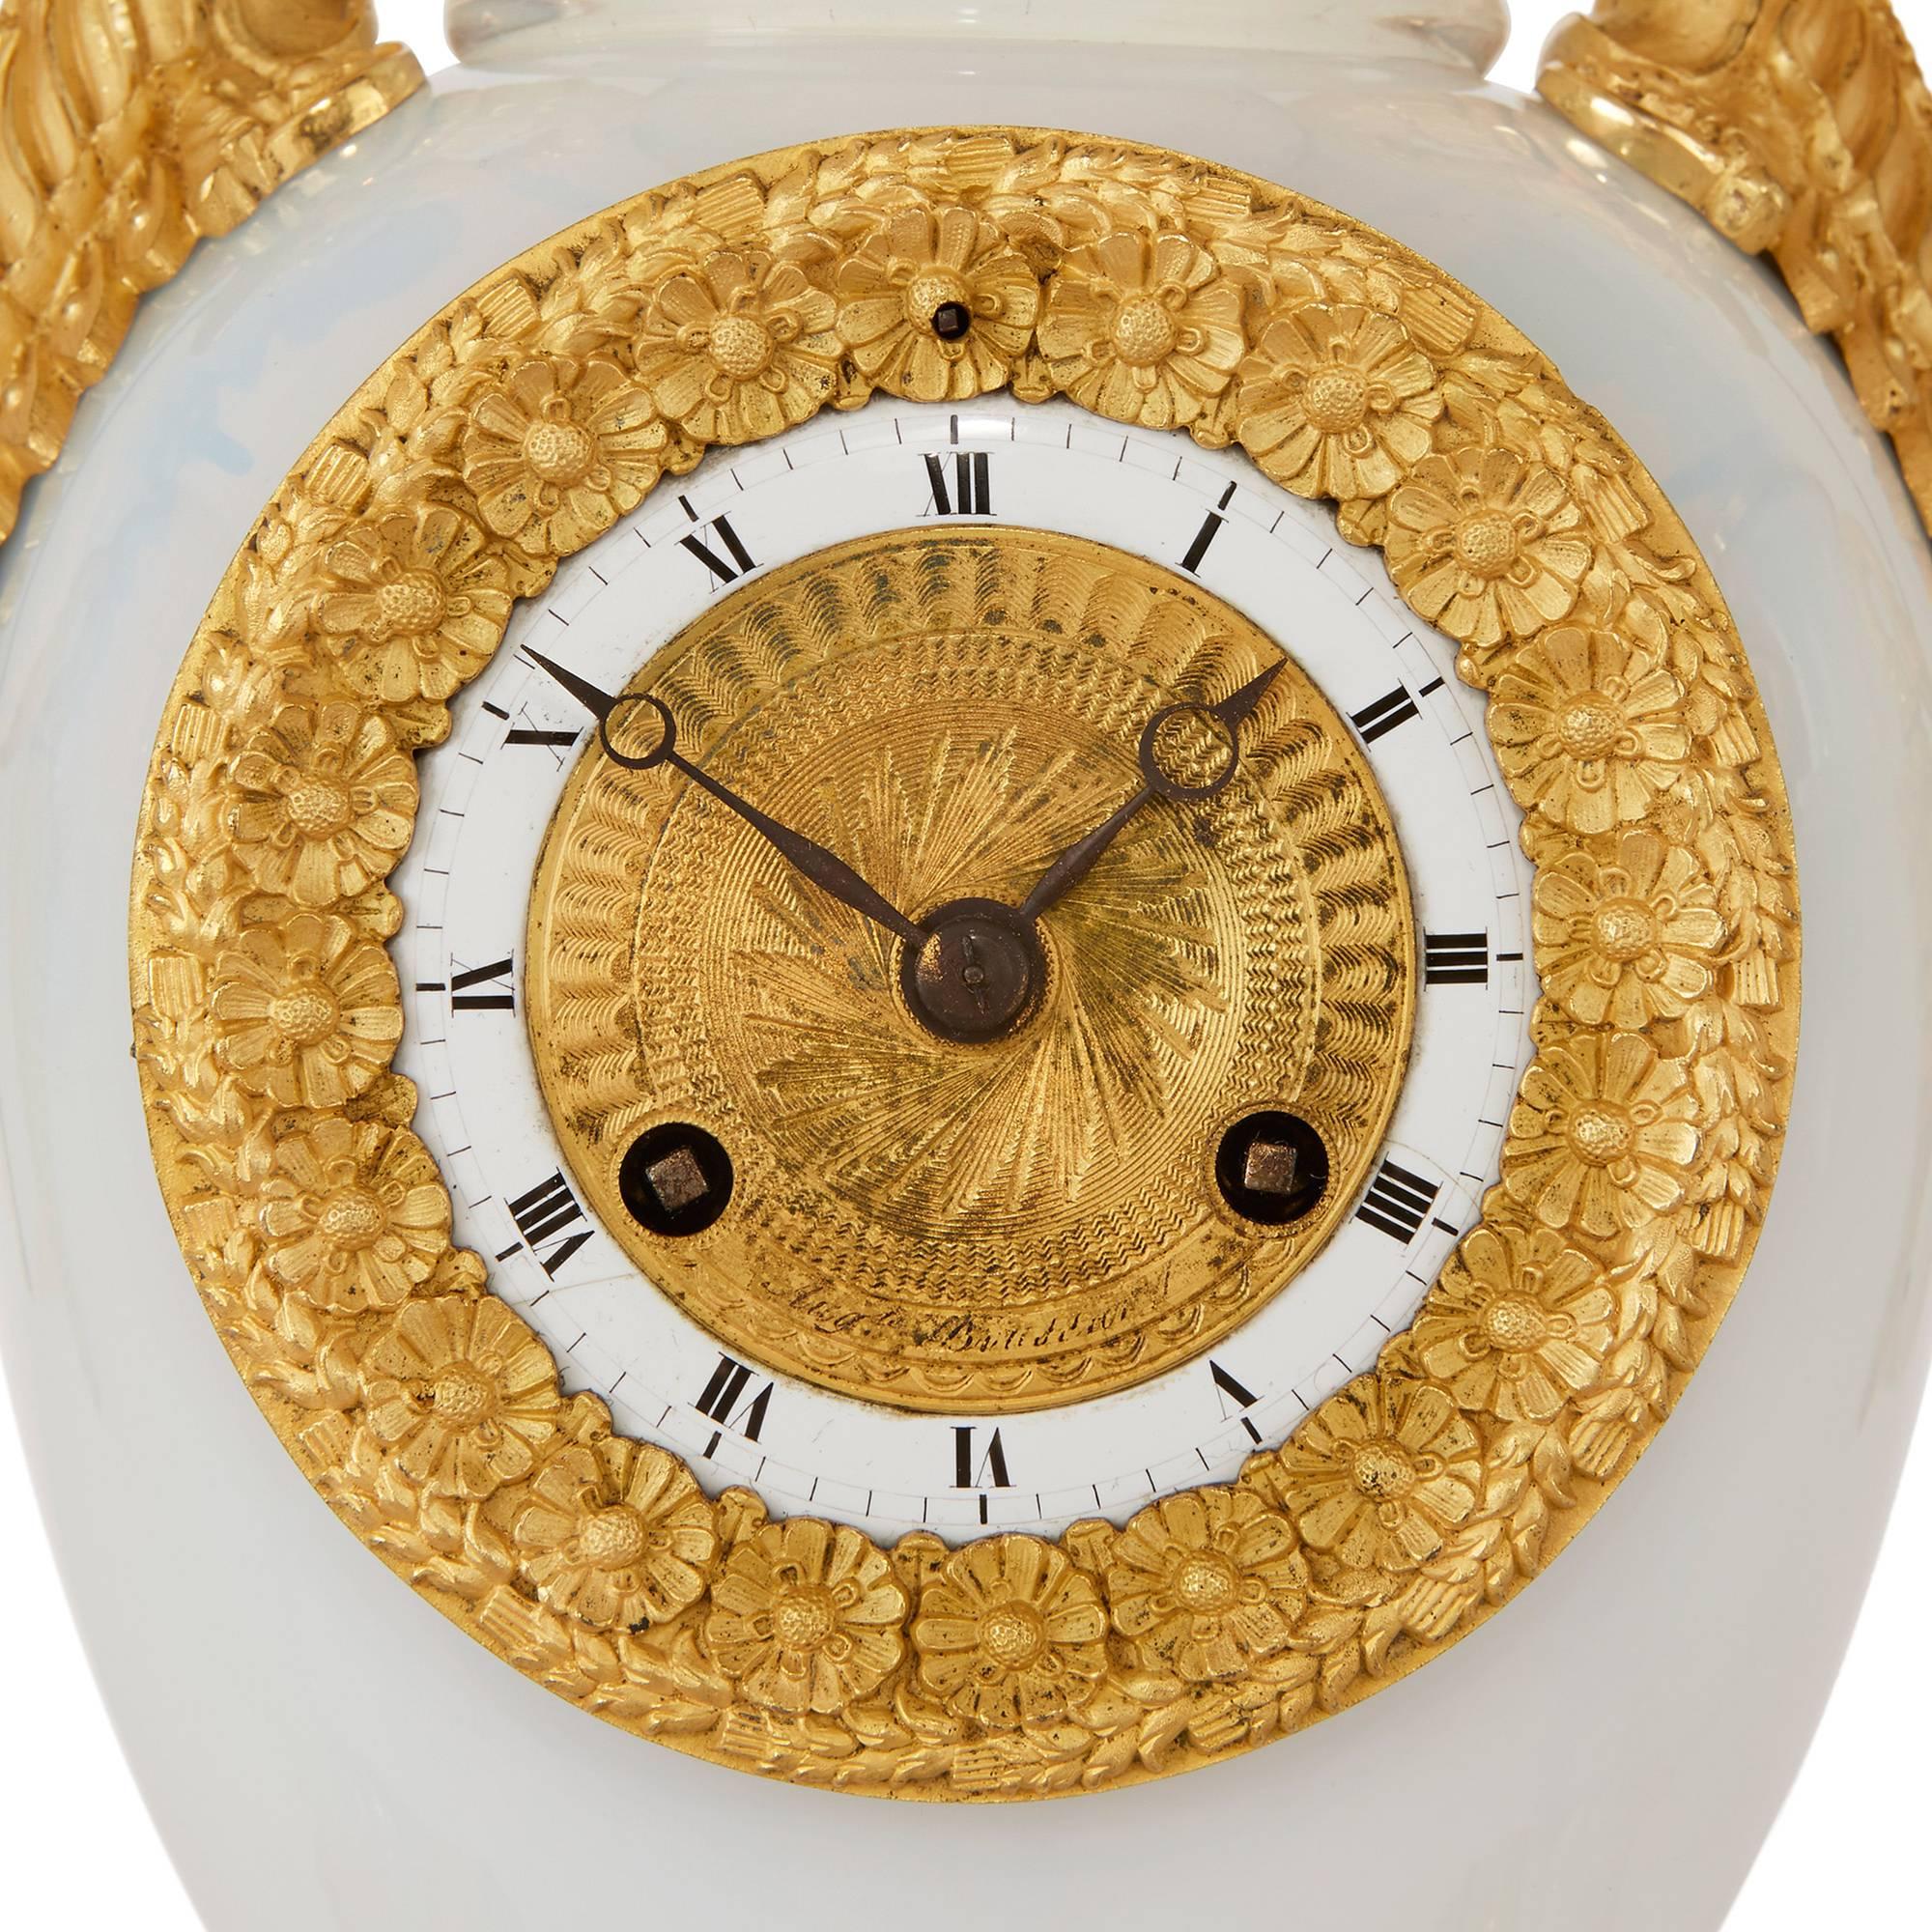 From the Restauration period; comprising a central clock and a pair of flanking vases, the central vase shaped clock with circular dial signed 'AUG. de Boussiard' and twin ormolu swan-head handles, the pair of vases similarly decorated.

The